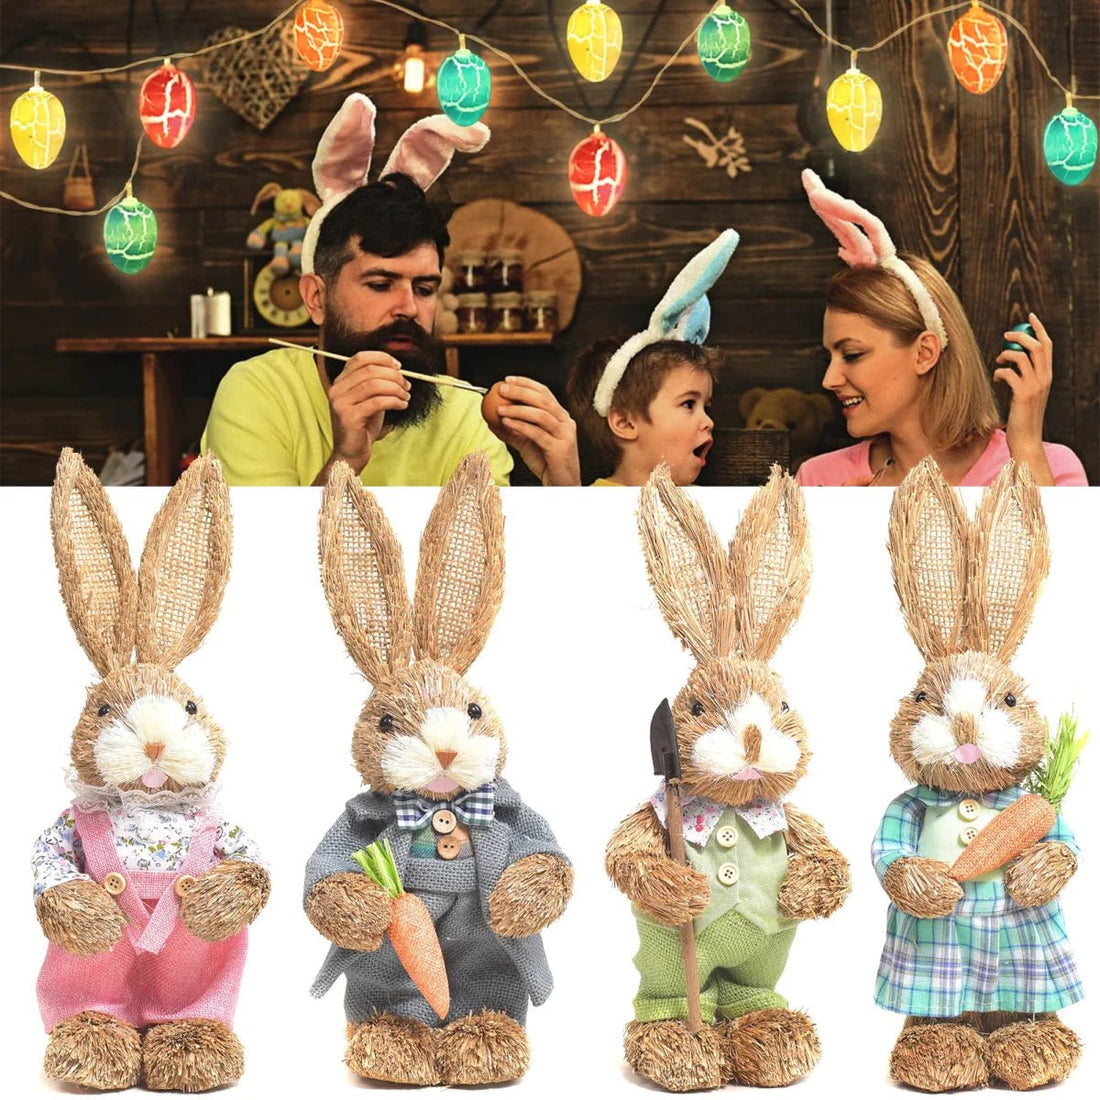 Spring Forward with Eco-Friendly Decor: The Easter Bunny Cute Decoration - Scribble Snacks